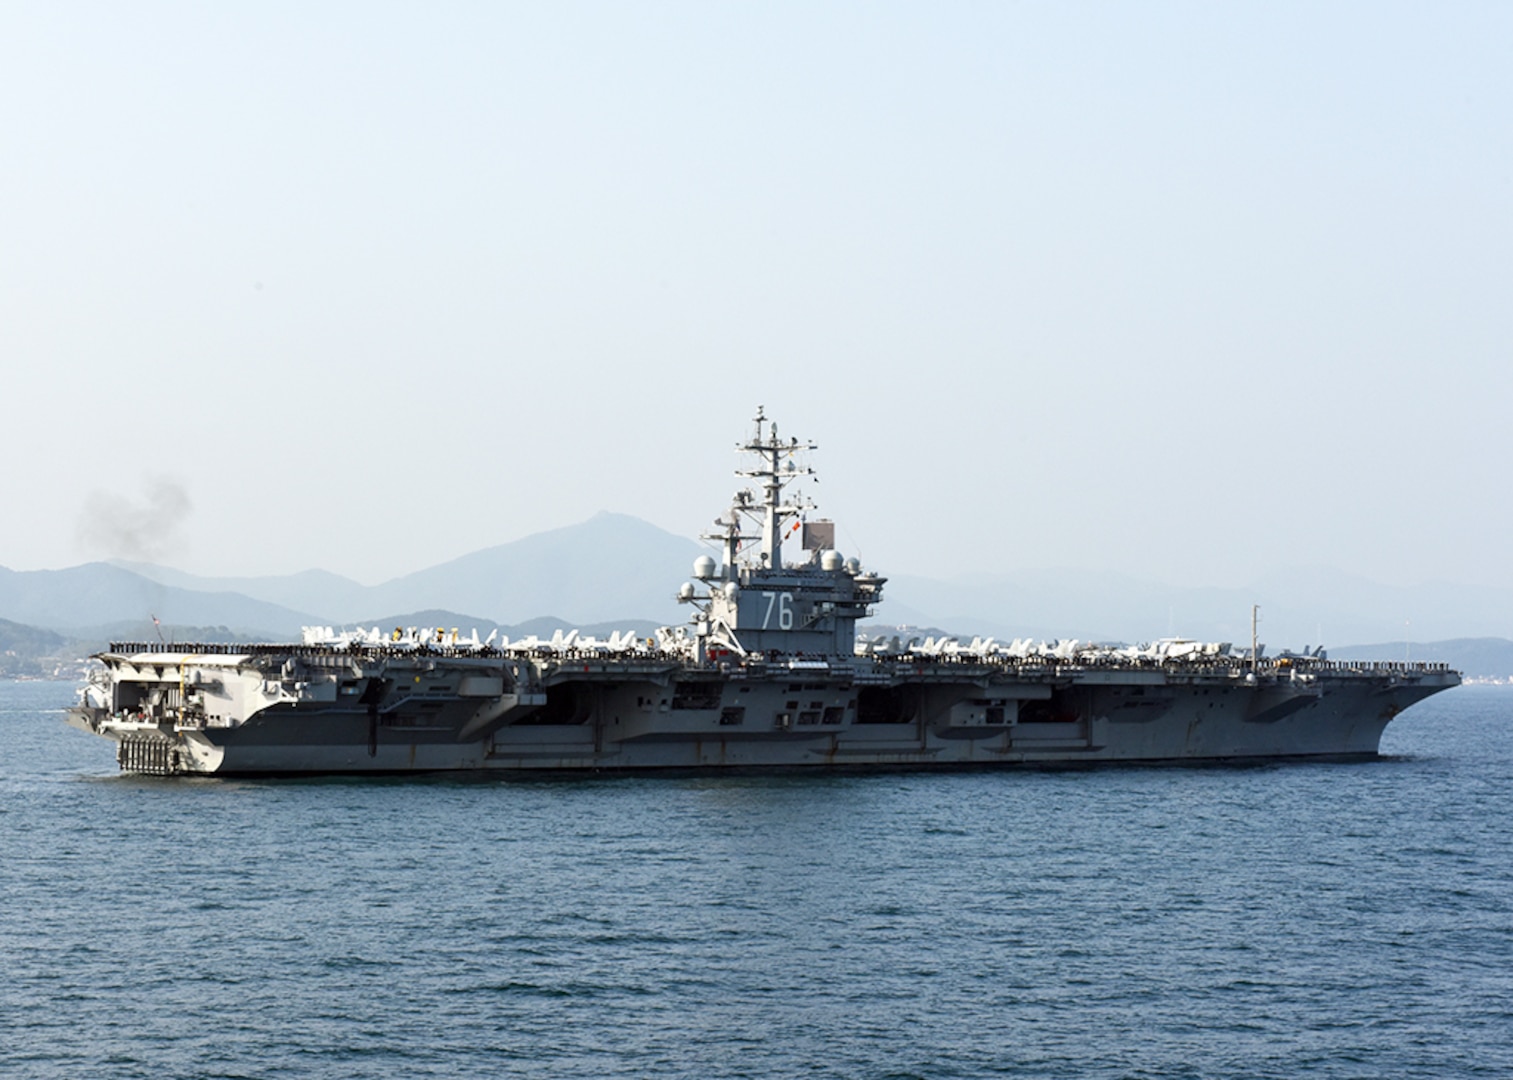 BUSAN, Republic of Korea, (October 23, 2015) Sailors aboard the U.S. Navy's only forward-deployed aircraft carrier USS Ronald Reagan (CVN 76), man the rails while participating in the Republic of Korea Navy’s Fleet Review. The fleet review celebrated the 70th anniversary of the ROK Navy and served as a symbol of the enduring U.S. and ROK alliance. 